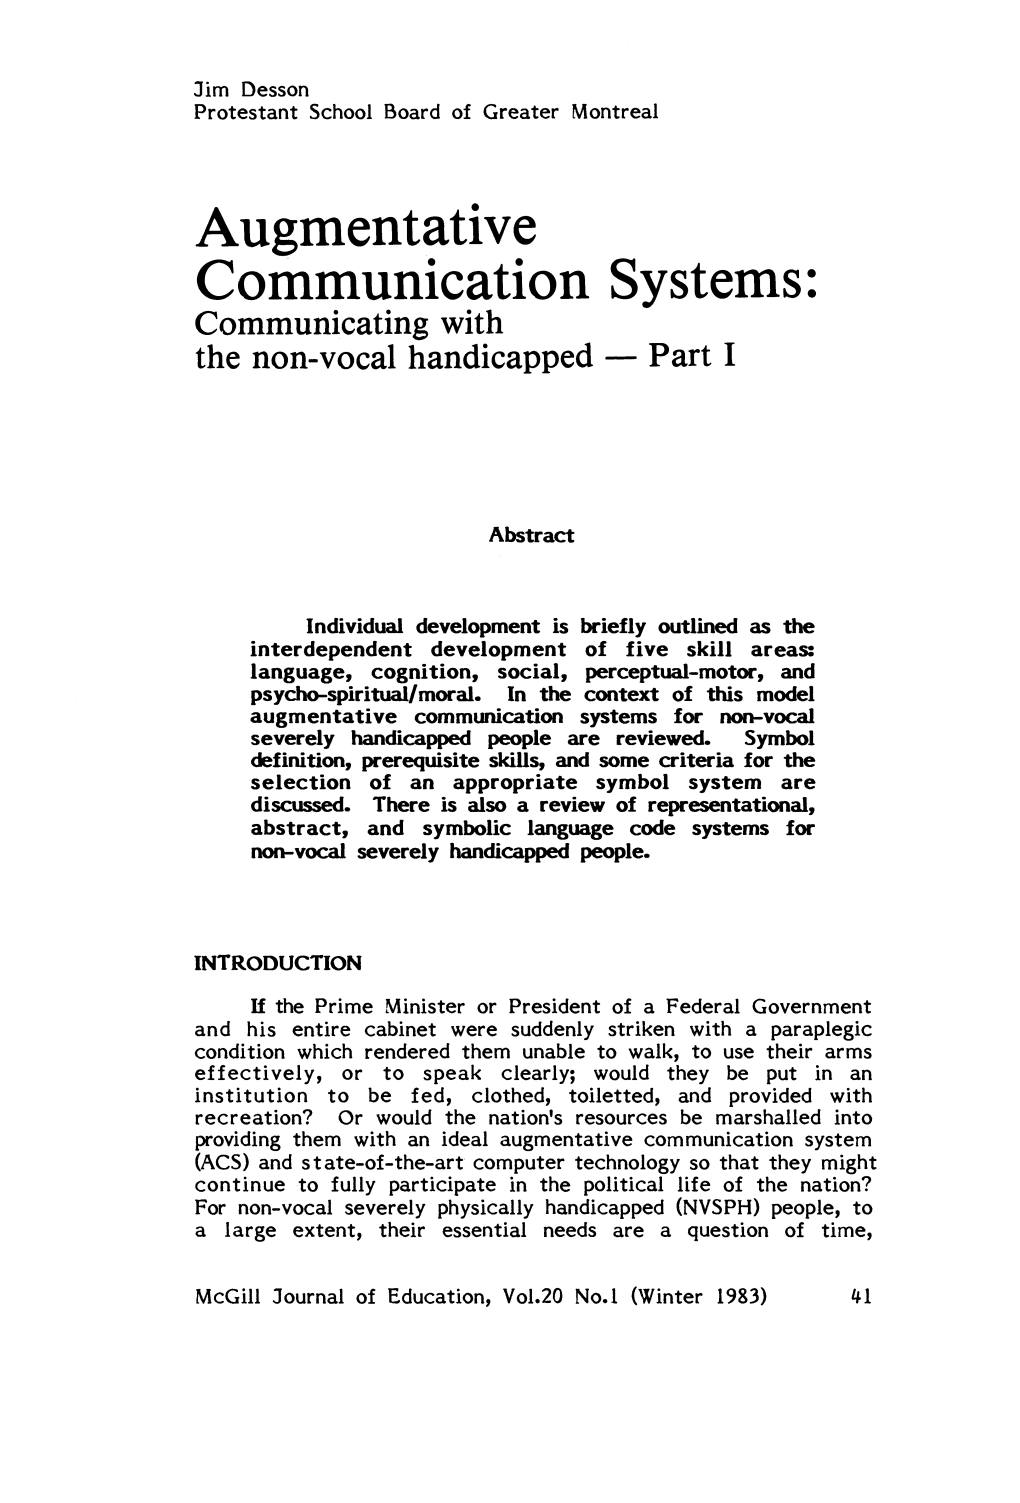 Augmentative Communication Systems: Communicating with the Non-Vocal Handicapped - Part 1